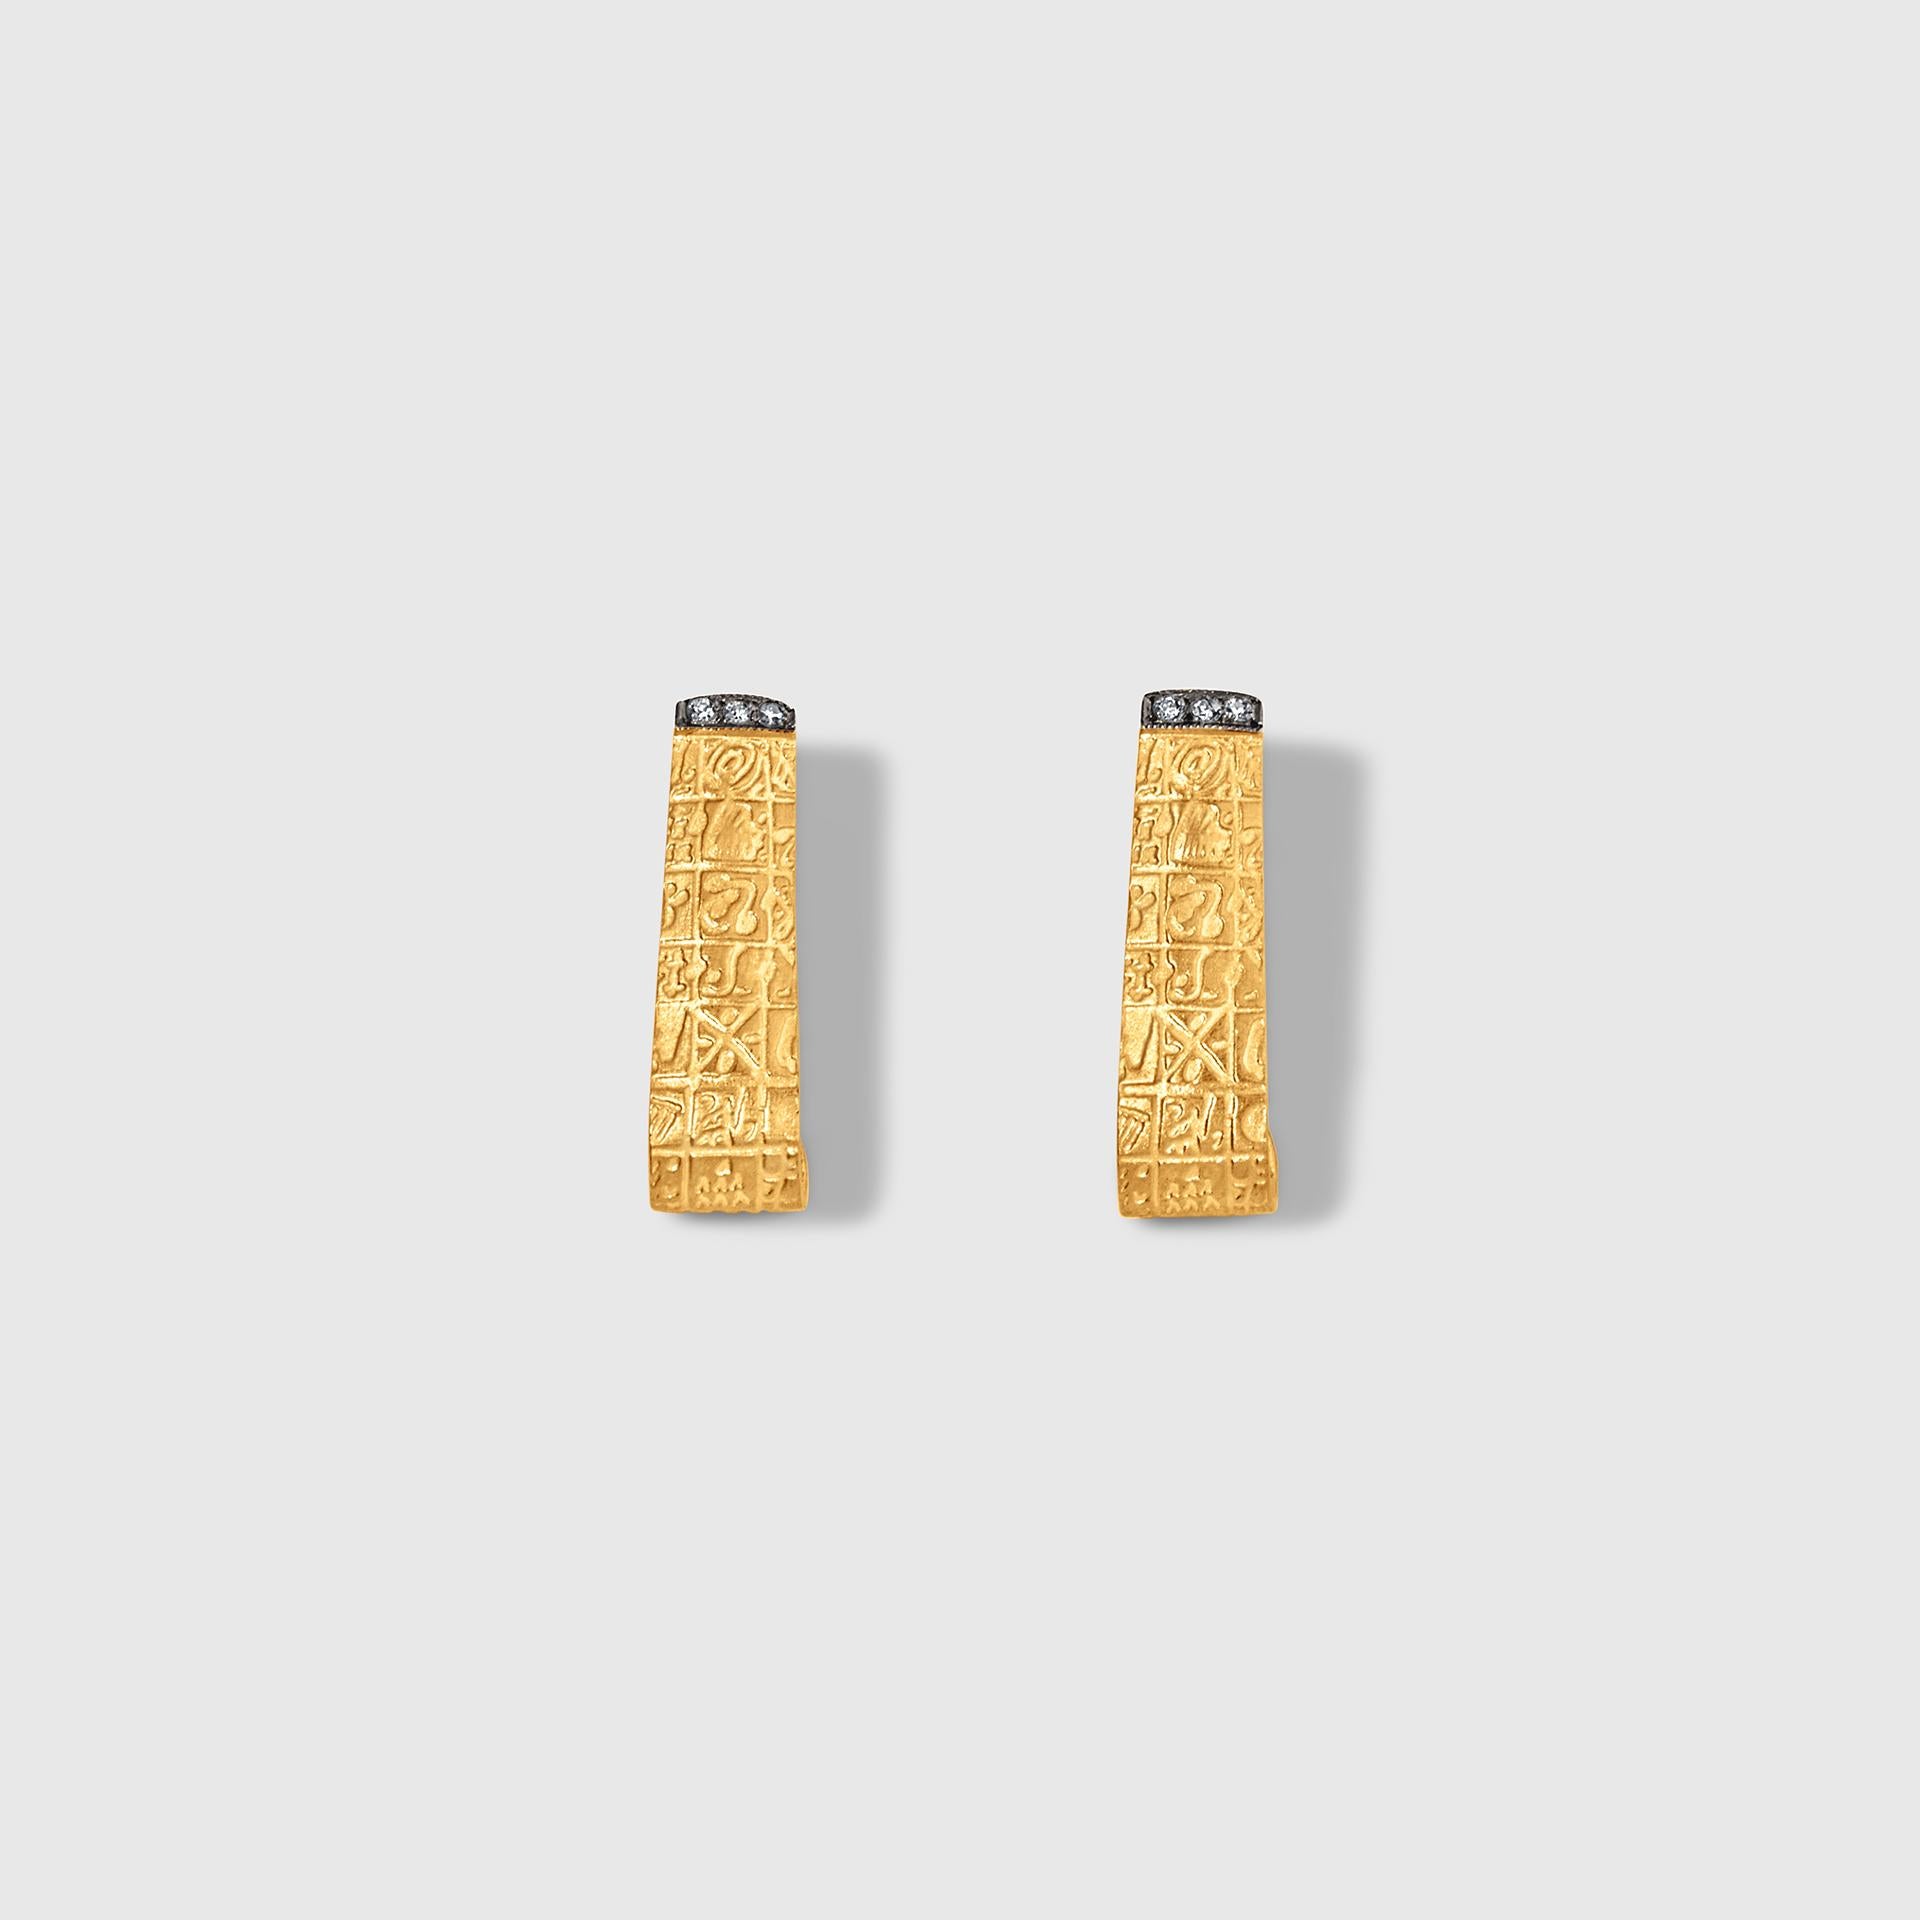 Vefk Earrings w/ Byzantine Coin Fragments and Diamonds, 24kt Gold and Silver, Size Small, Length: 1.25